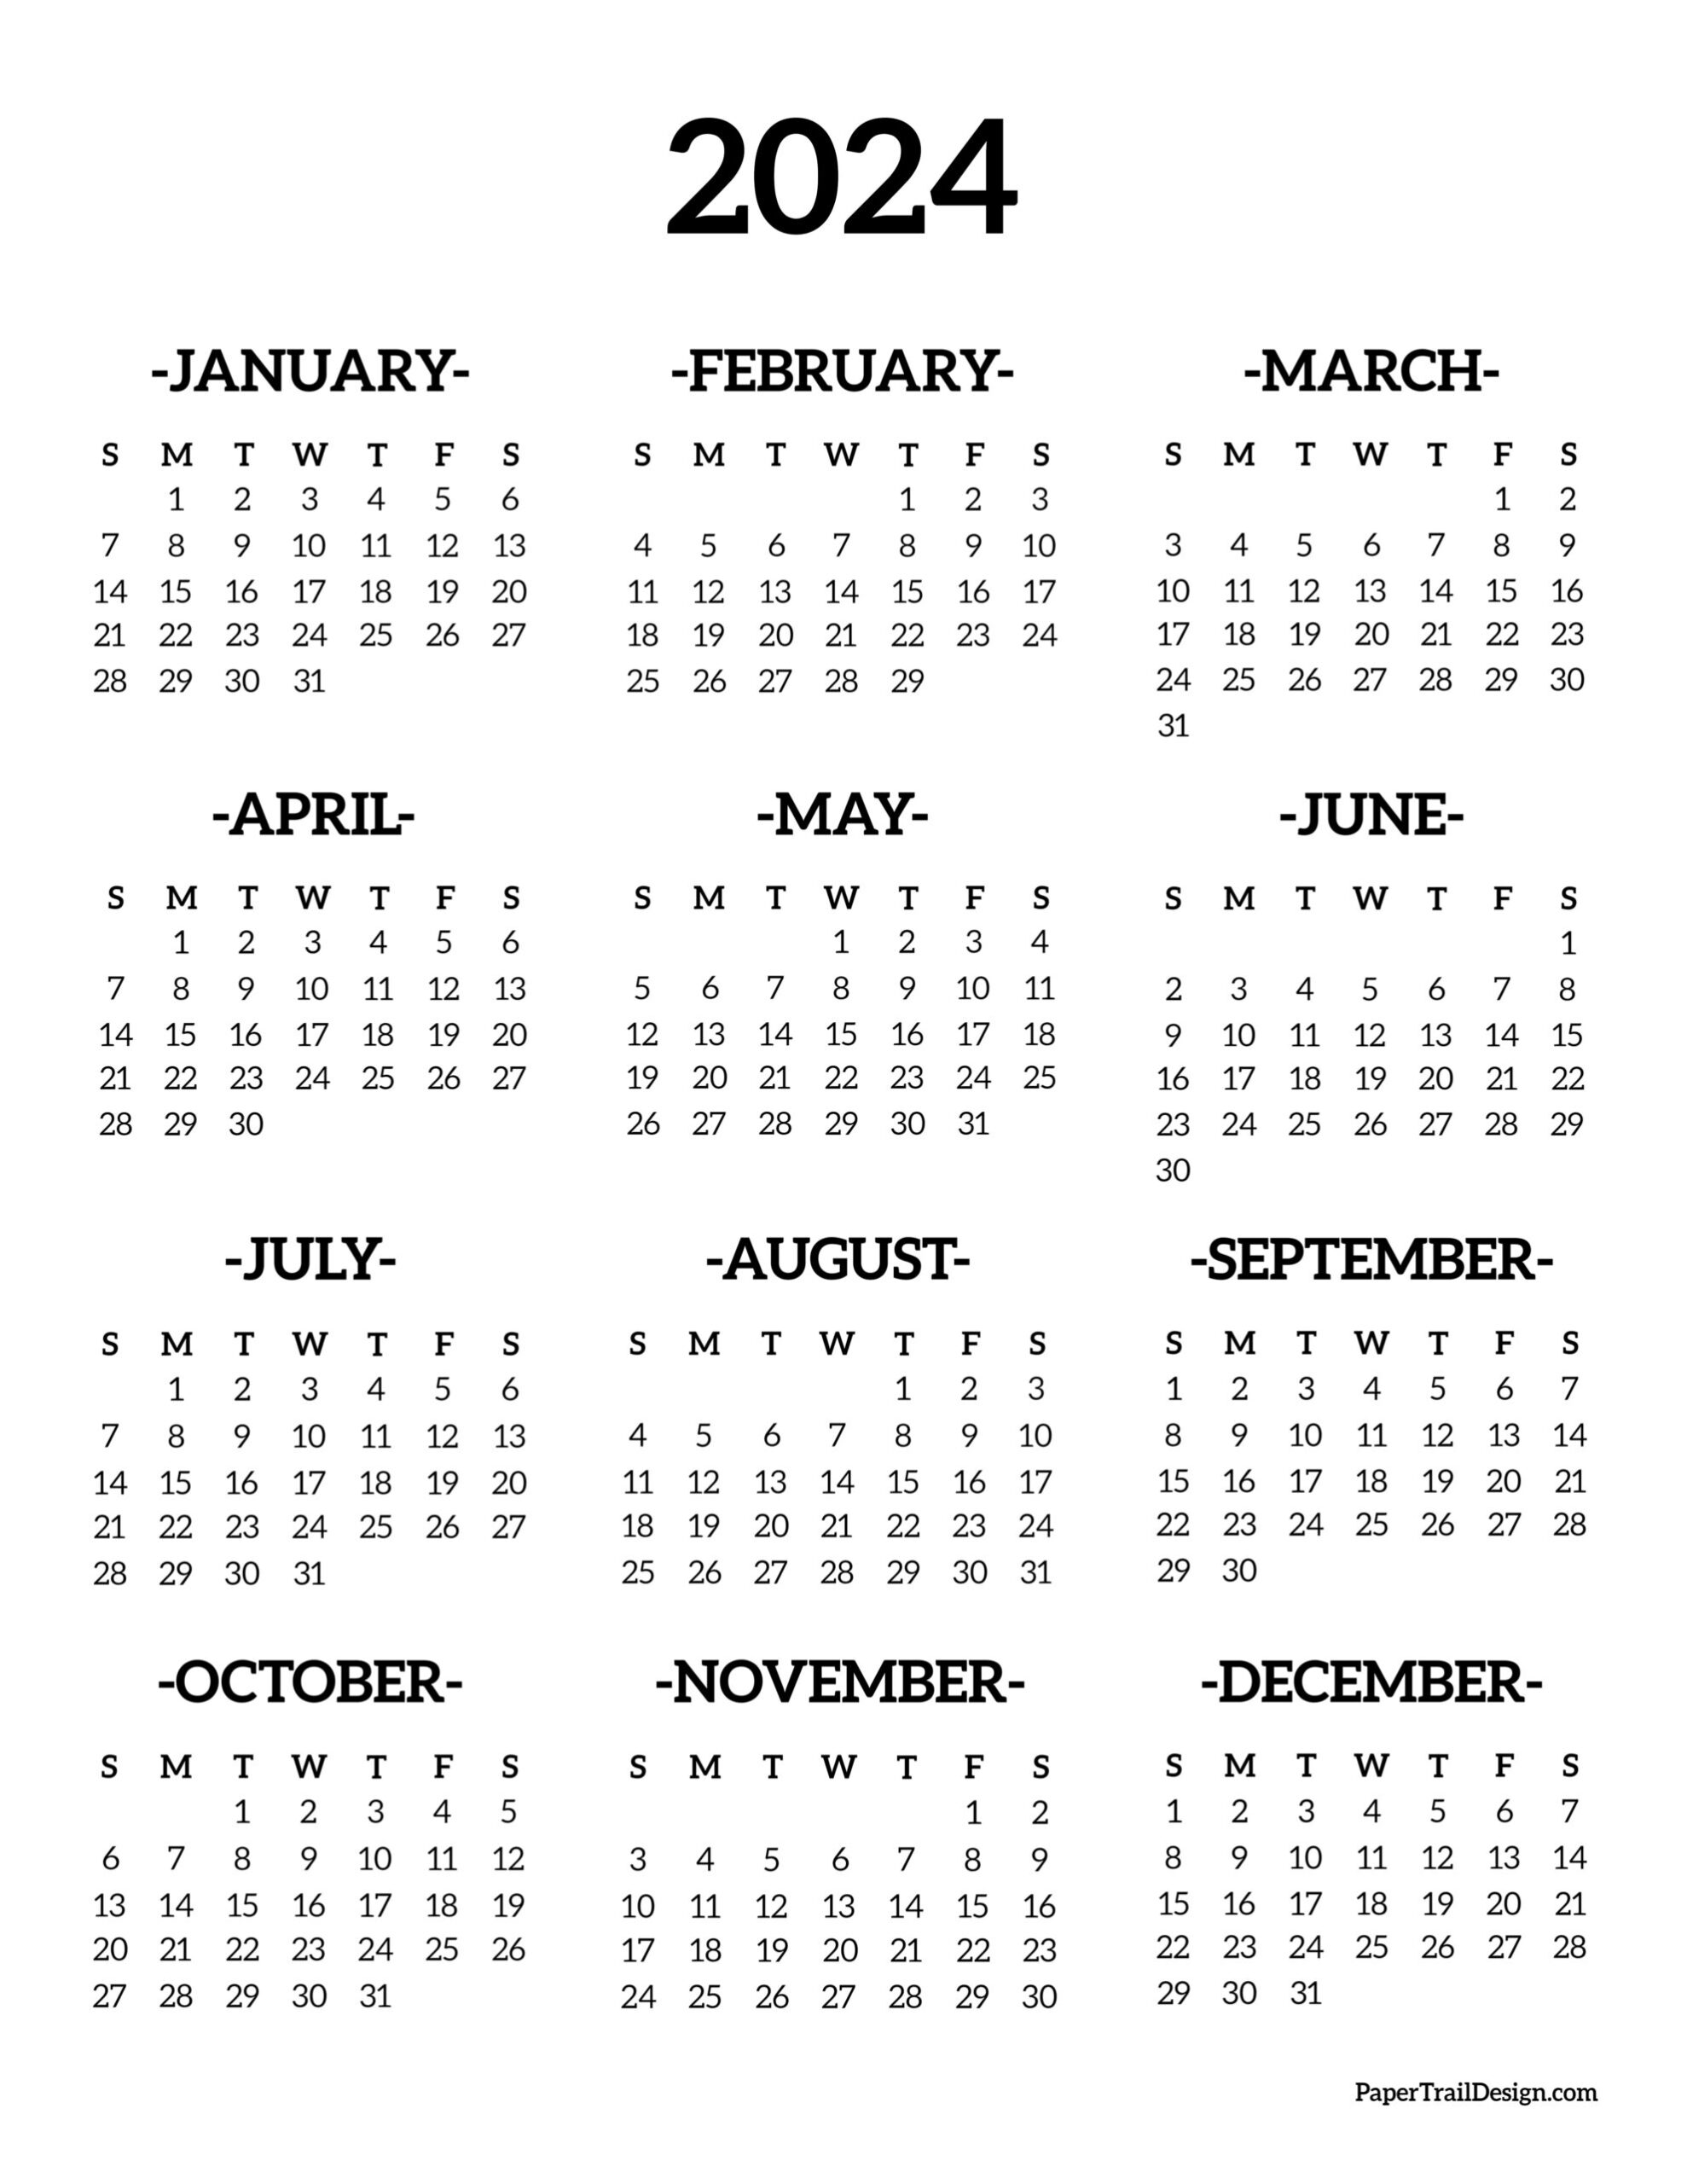 Calendar 2024 Printable One Page - Paper Trail Design for 2024 Printable Calendar 1 Page